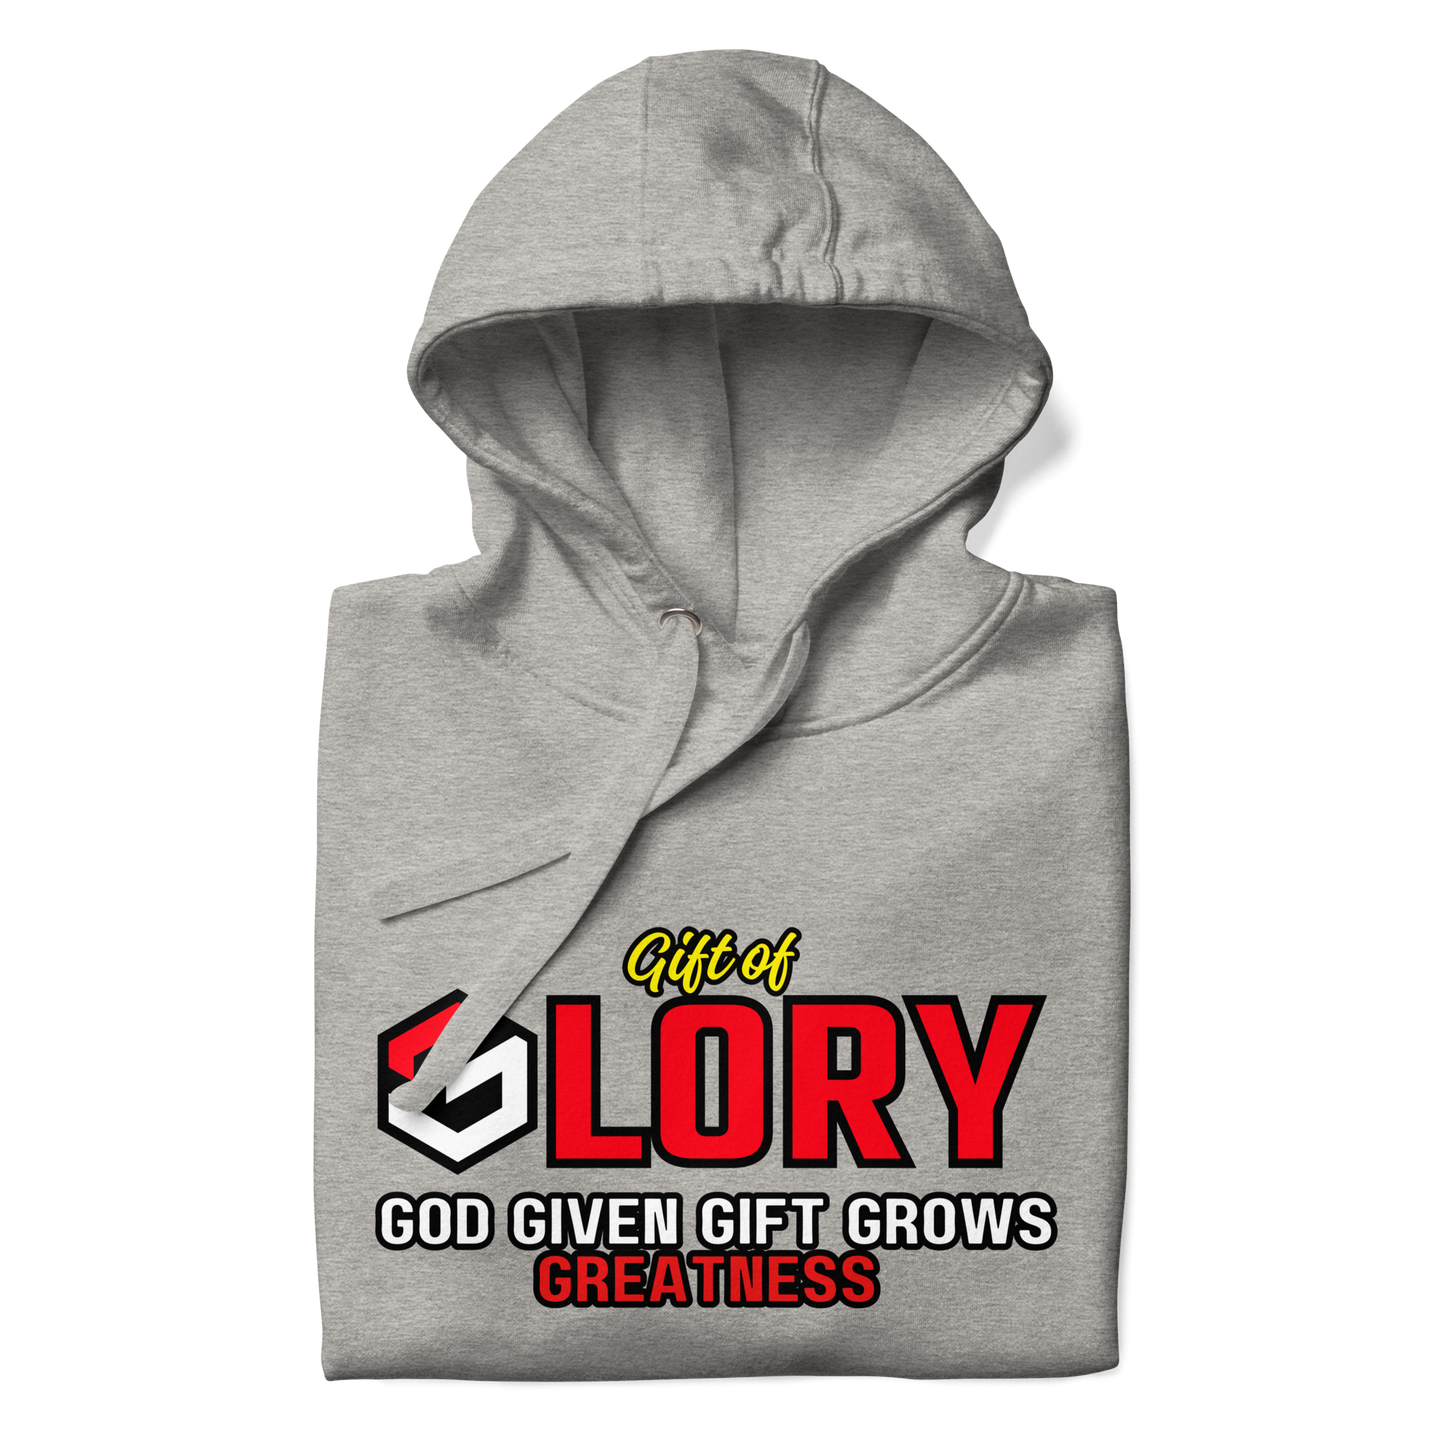 GLORY'S TRANSFORMED Pullover Hoodie - Gift of Glory